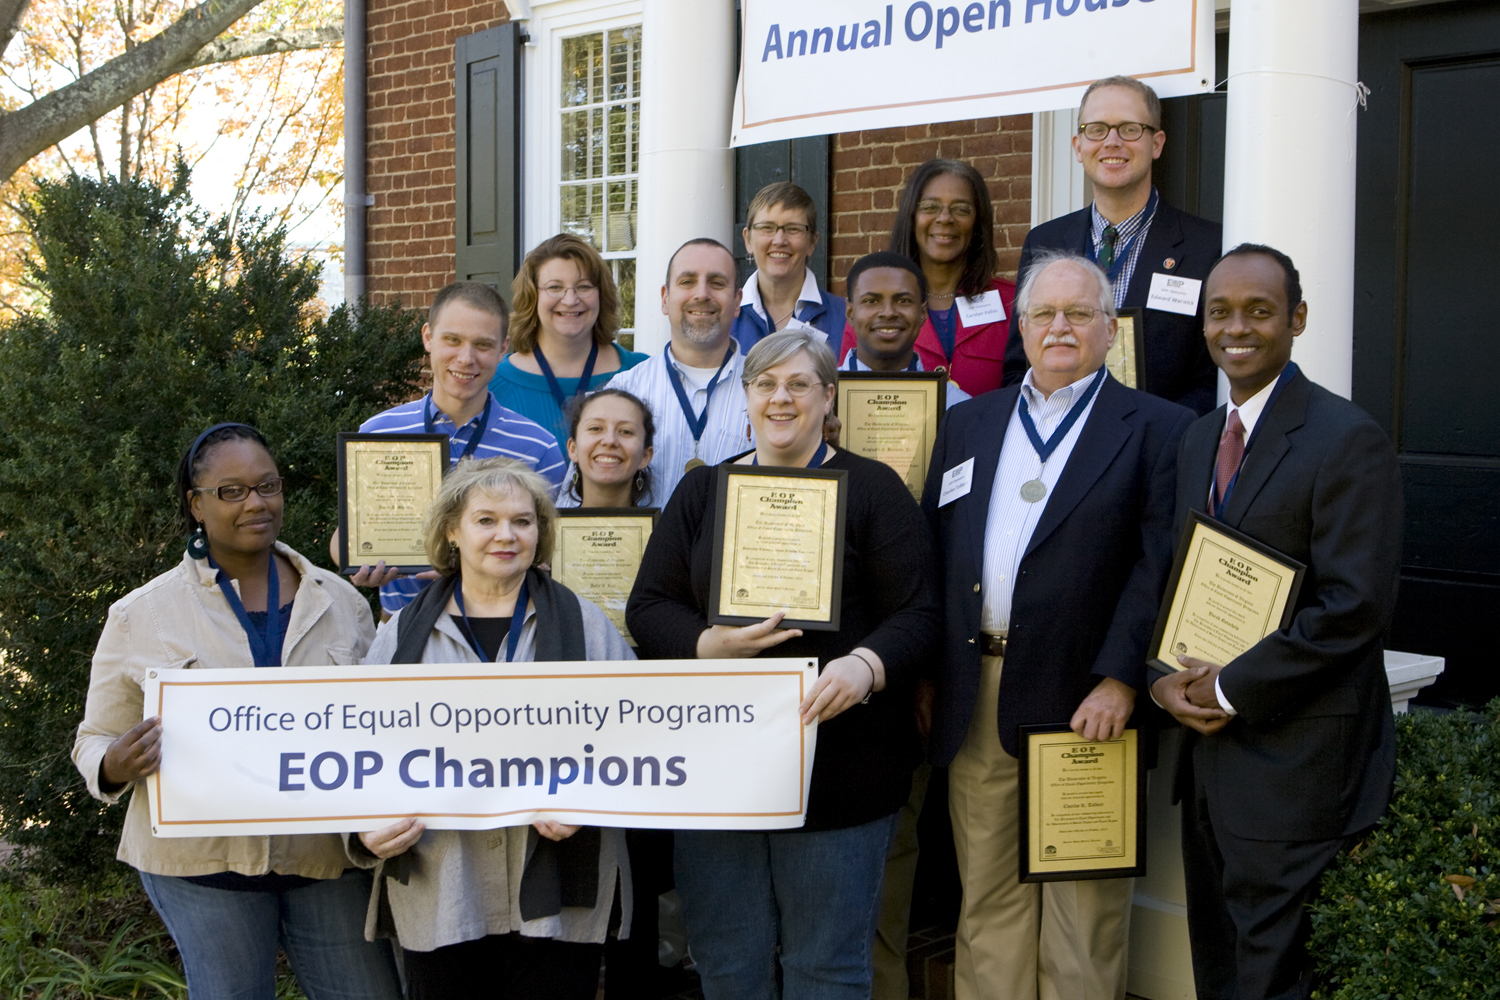 Group photo of people holding framed awards standing on the brick steps of the Equal Opportunity Programs house